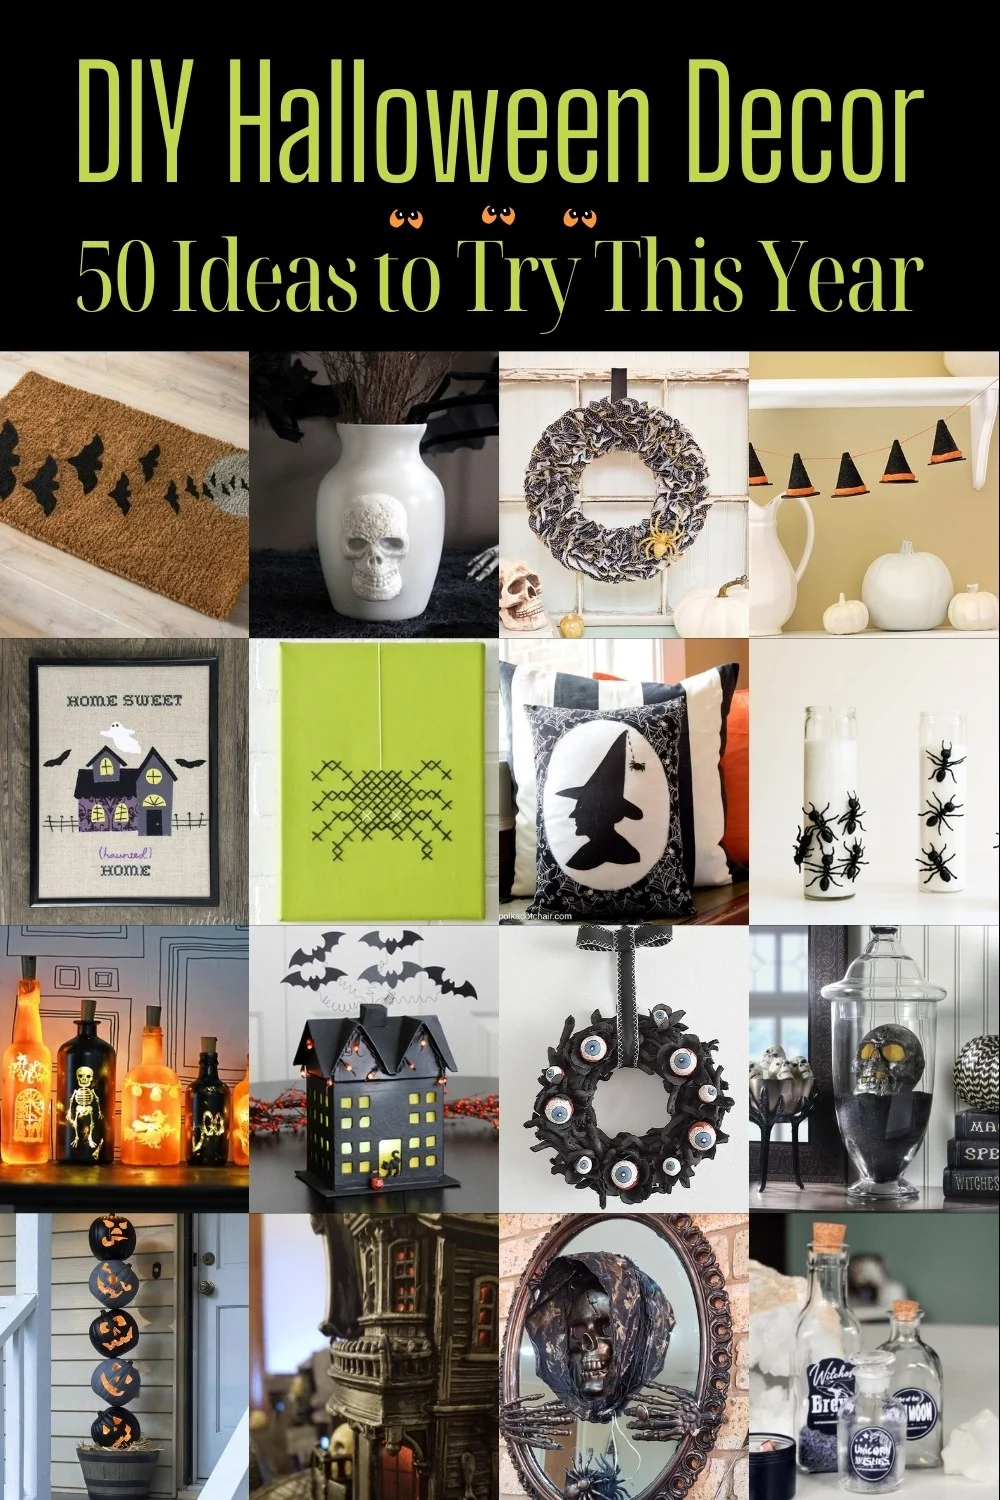 DIY Halloween Decor: 50 Projects to Make This Year - DIY Candy